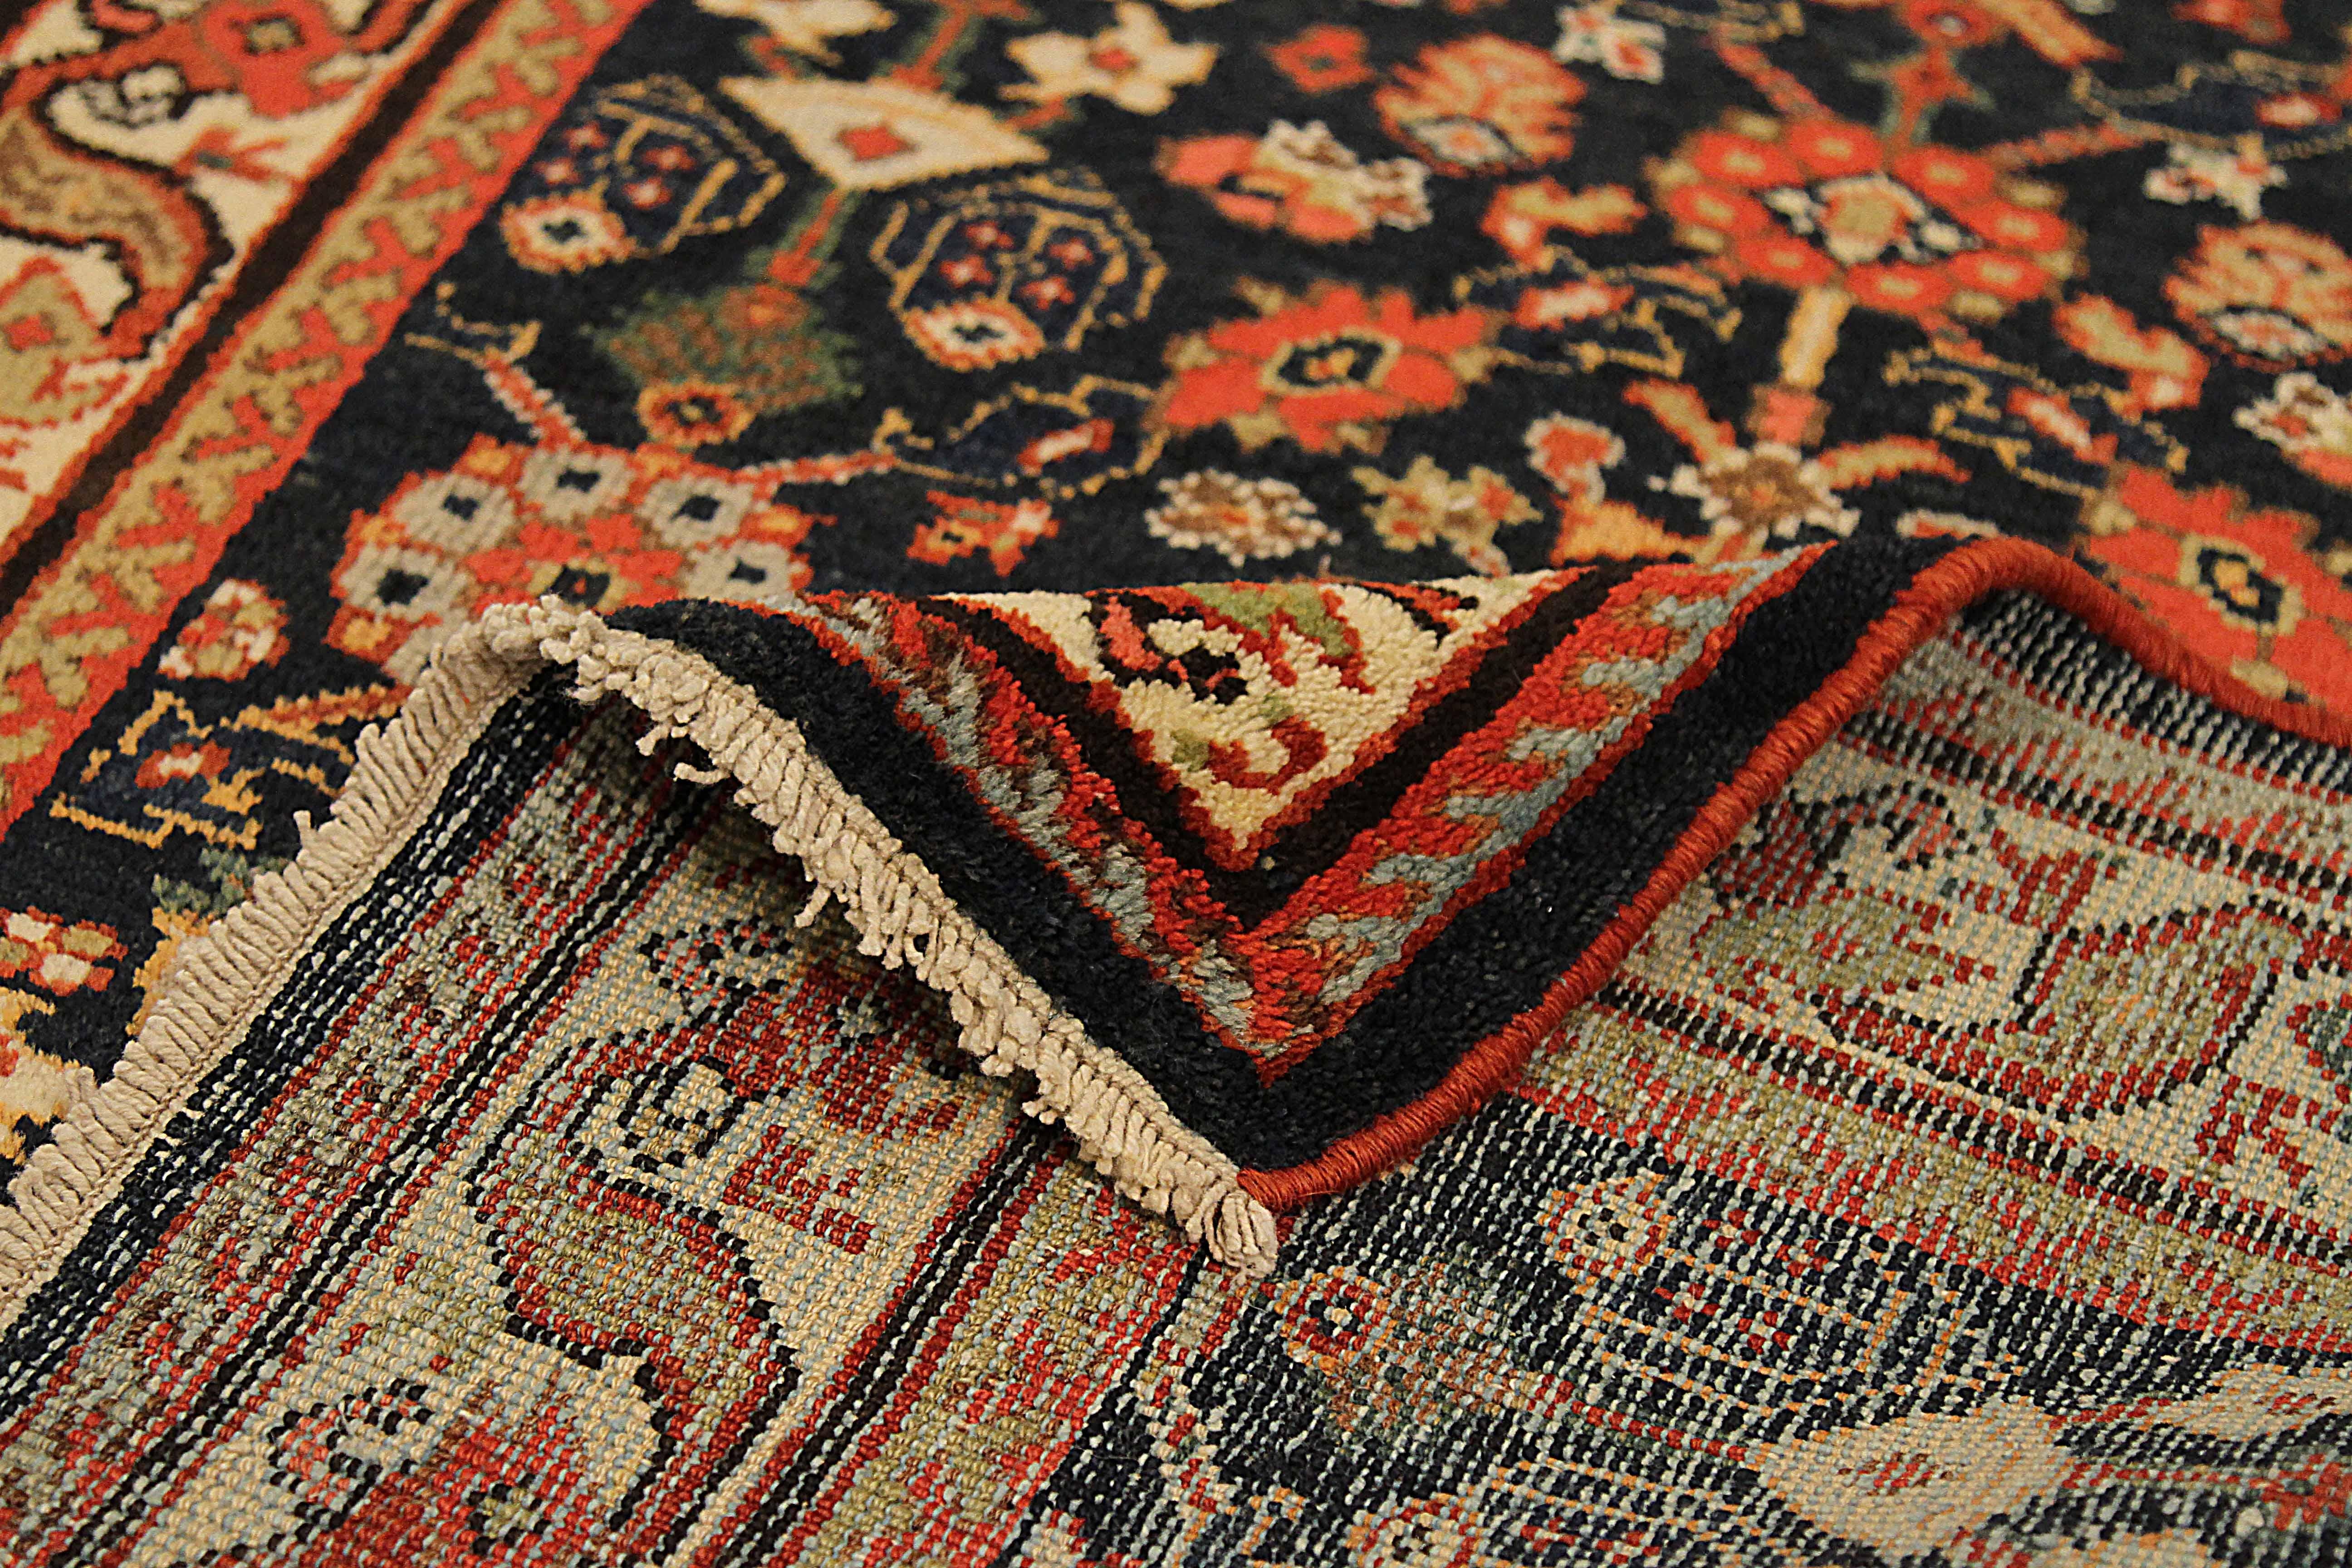 Hand-Woven Antique Persian Runner Rug Mahal Design For Sale